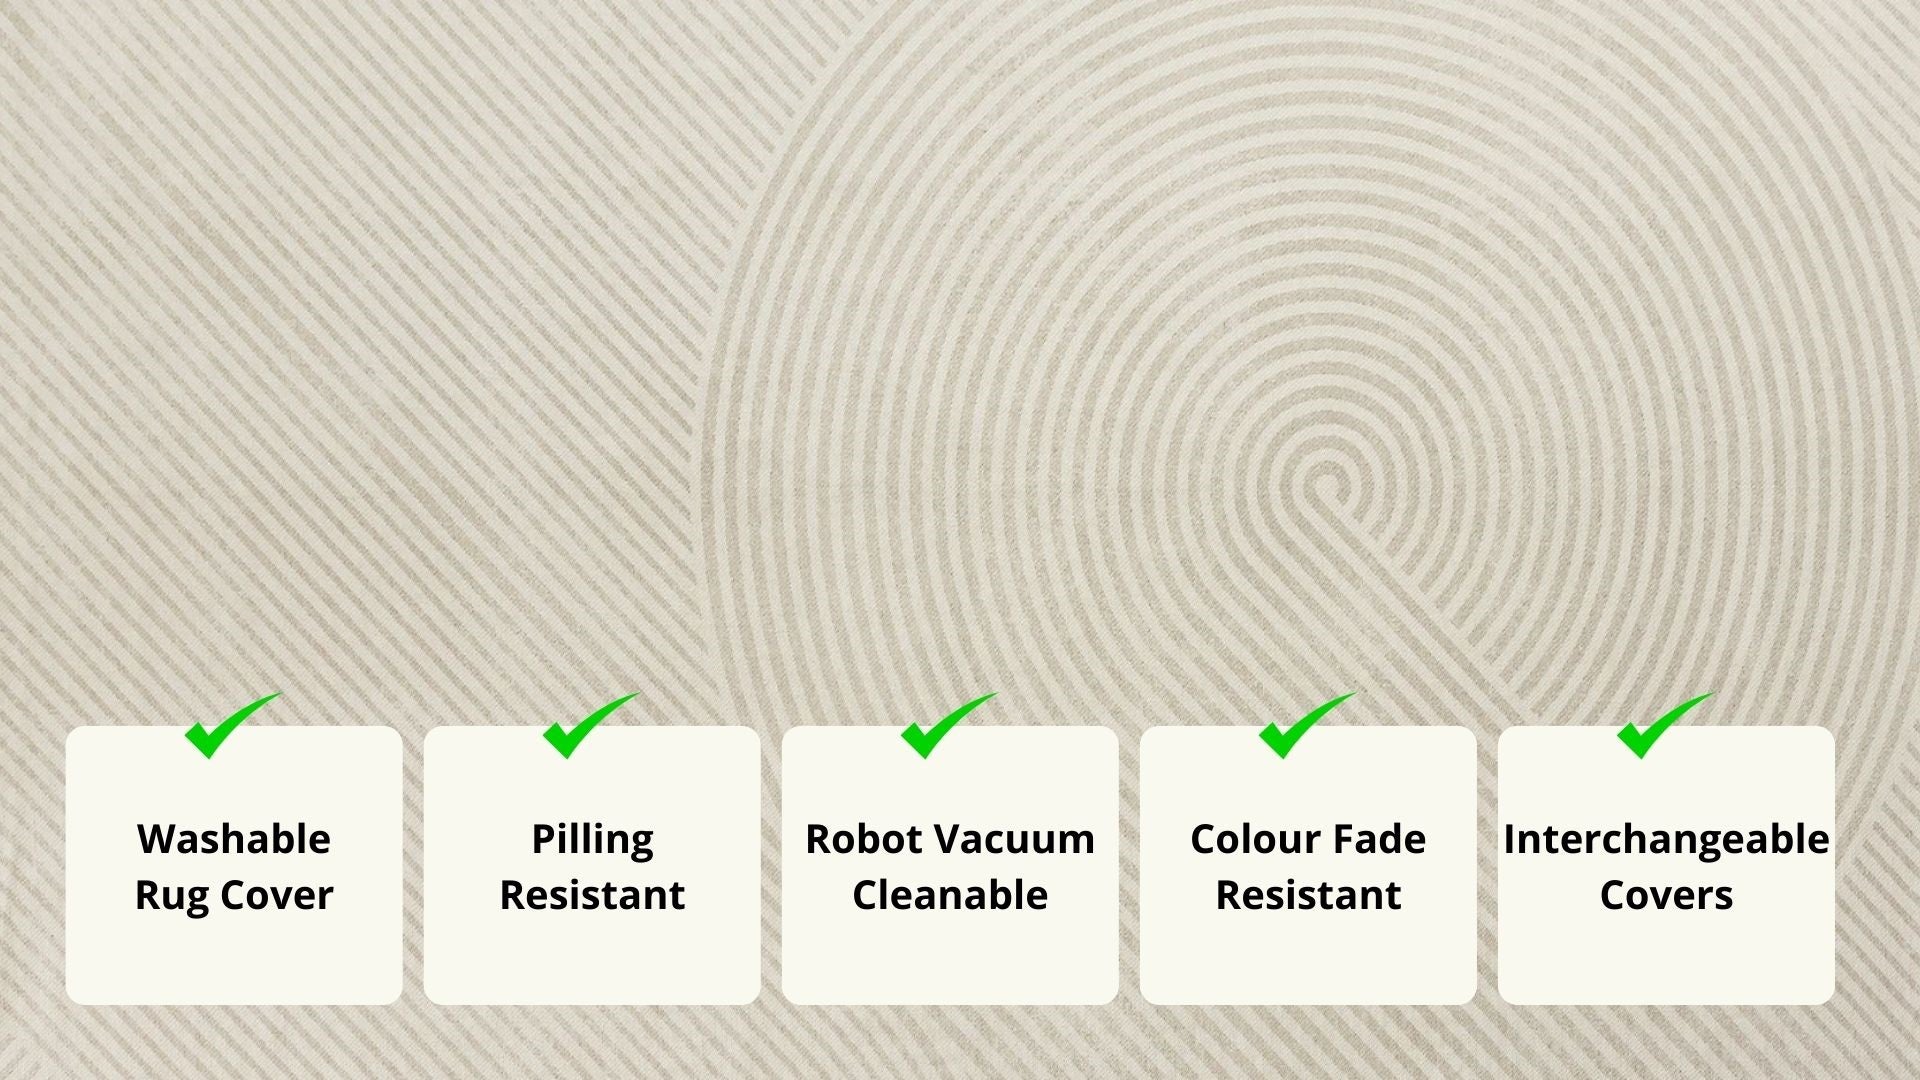 Rug feature highlights for orbit_washable_rug_beige